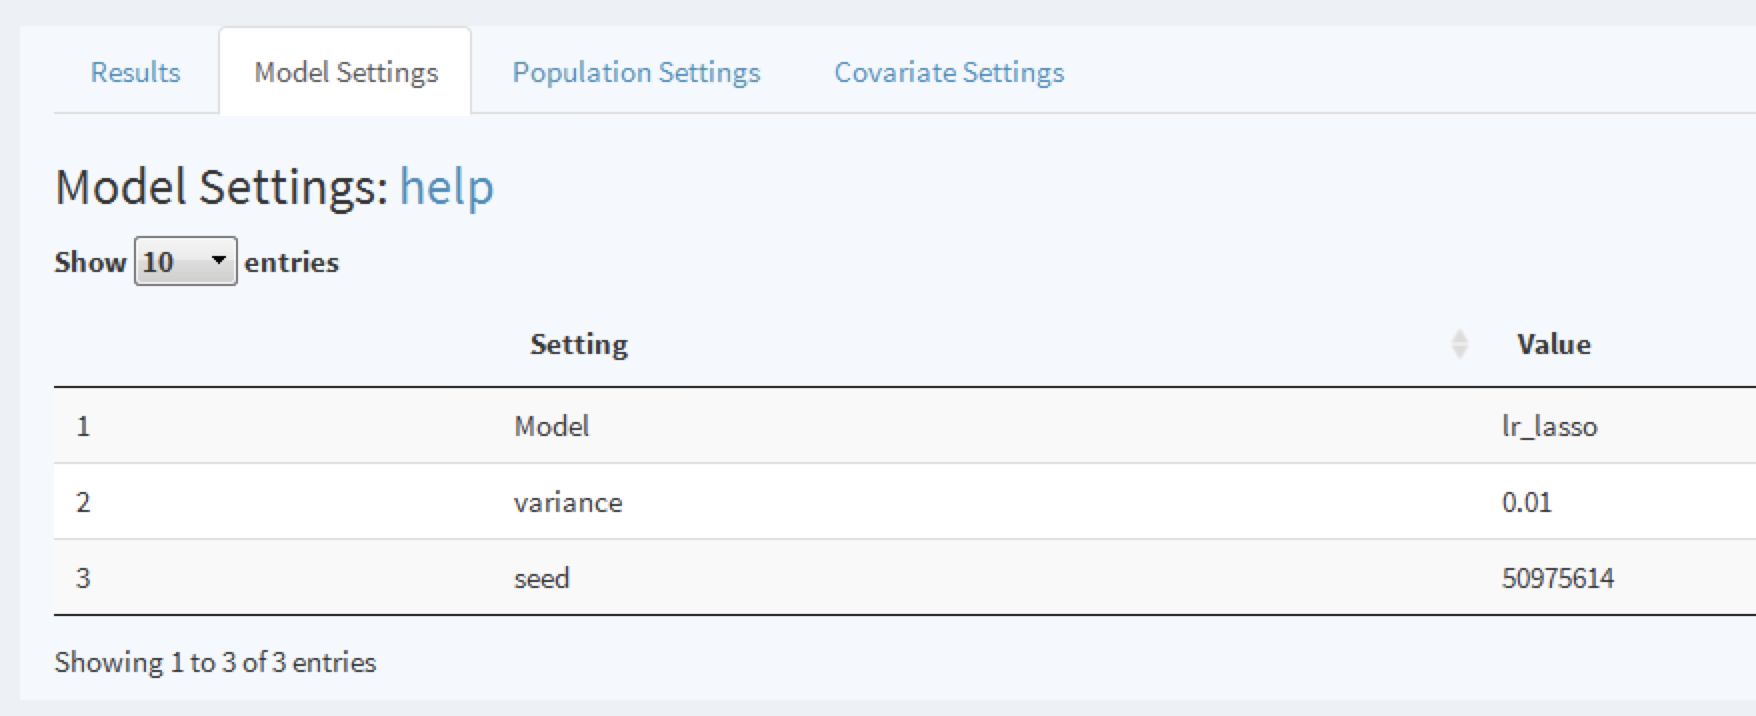 To view the model settings used when developing the model.